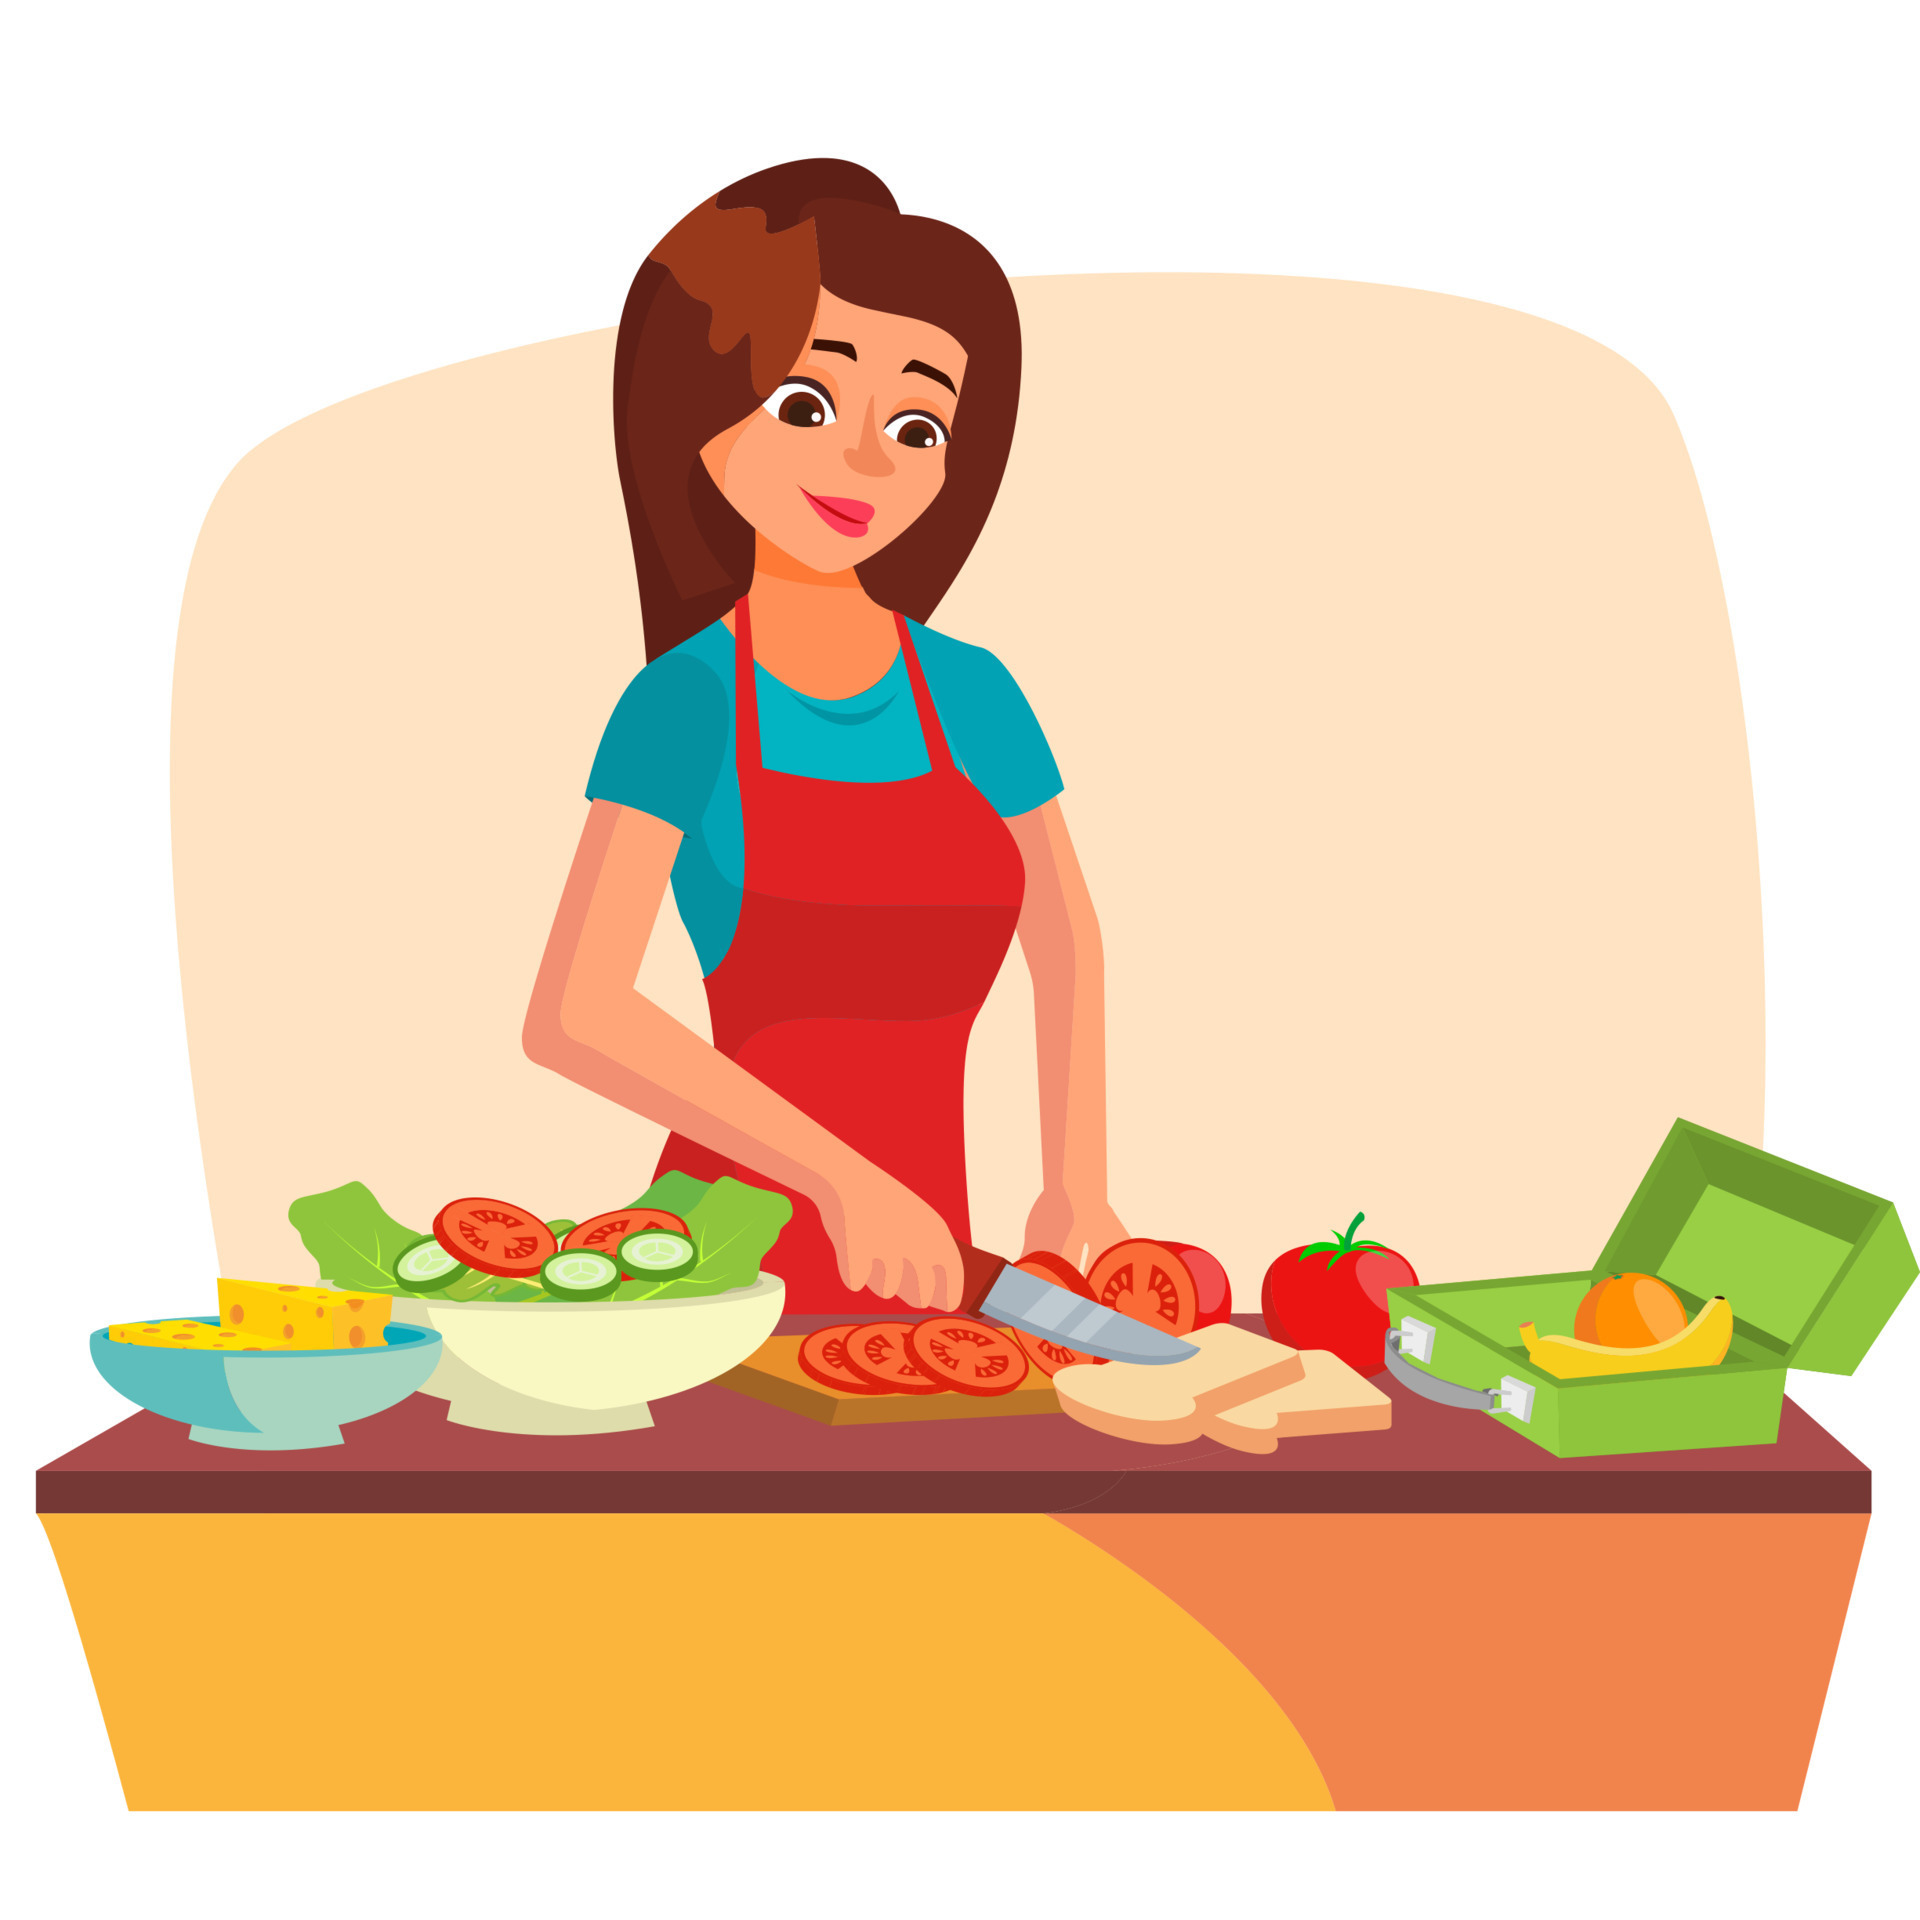 Lunch Box Vector. Making A Healthy School Lunch For Kids. Making School  Lunch Box. Cartoon Character Illustration 17351576 Vector Art at Vecteezy